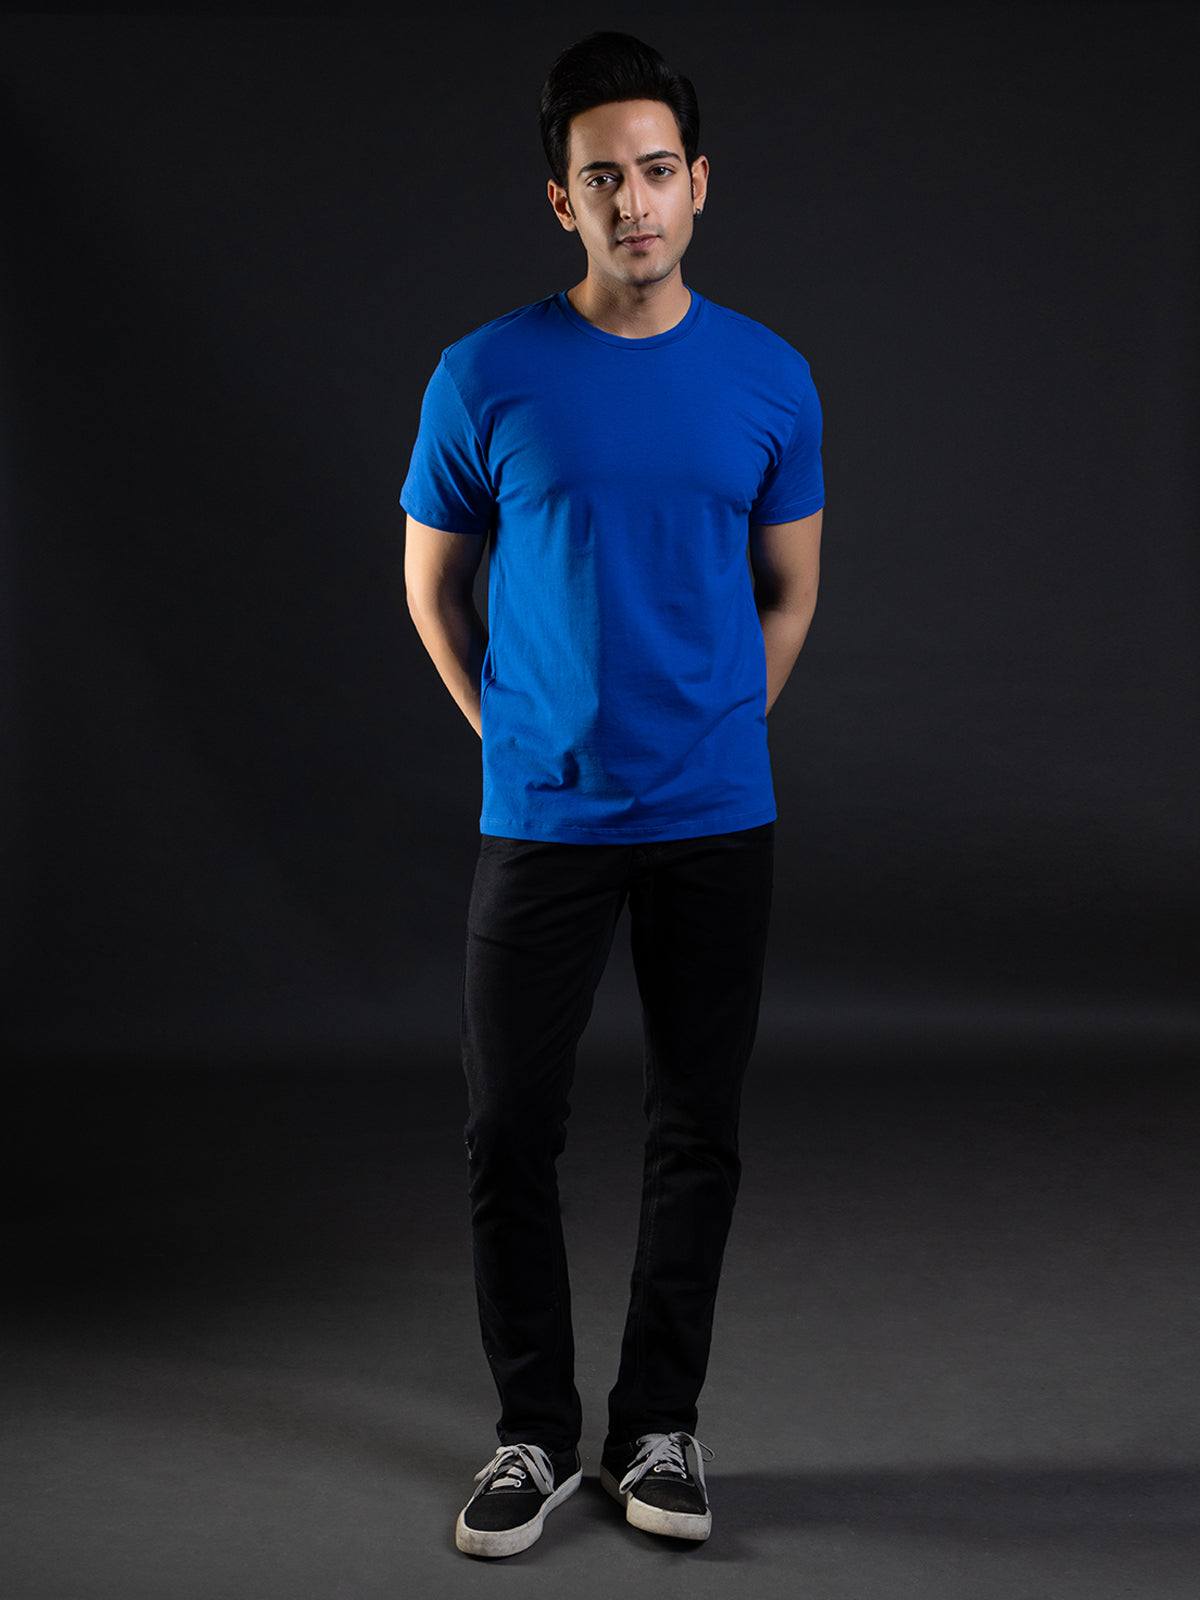 Royal Blue  | ACTION series | Sports t shirt for Men